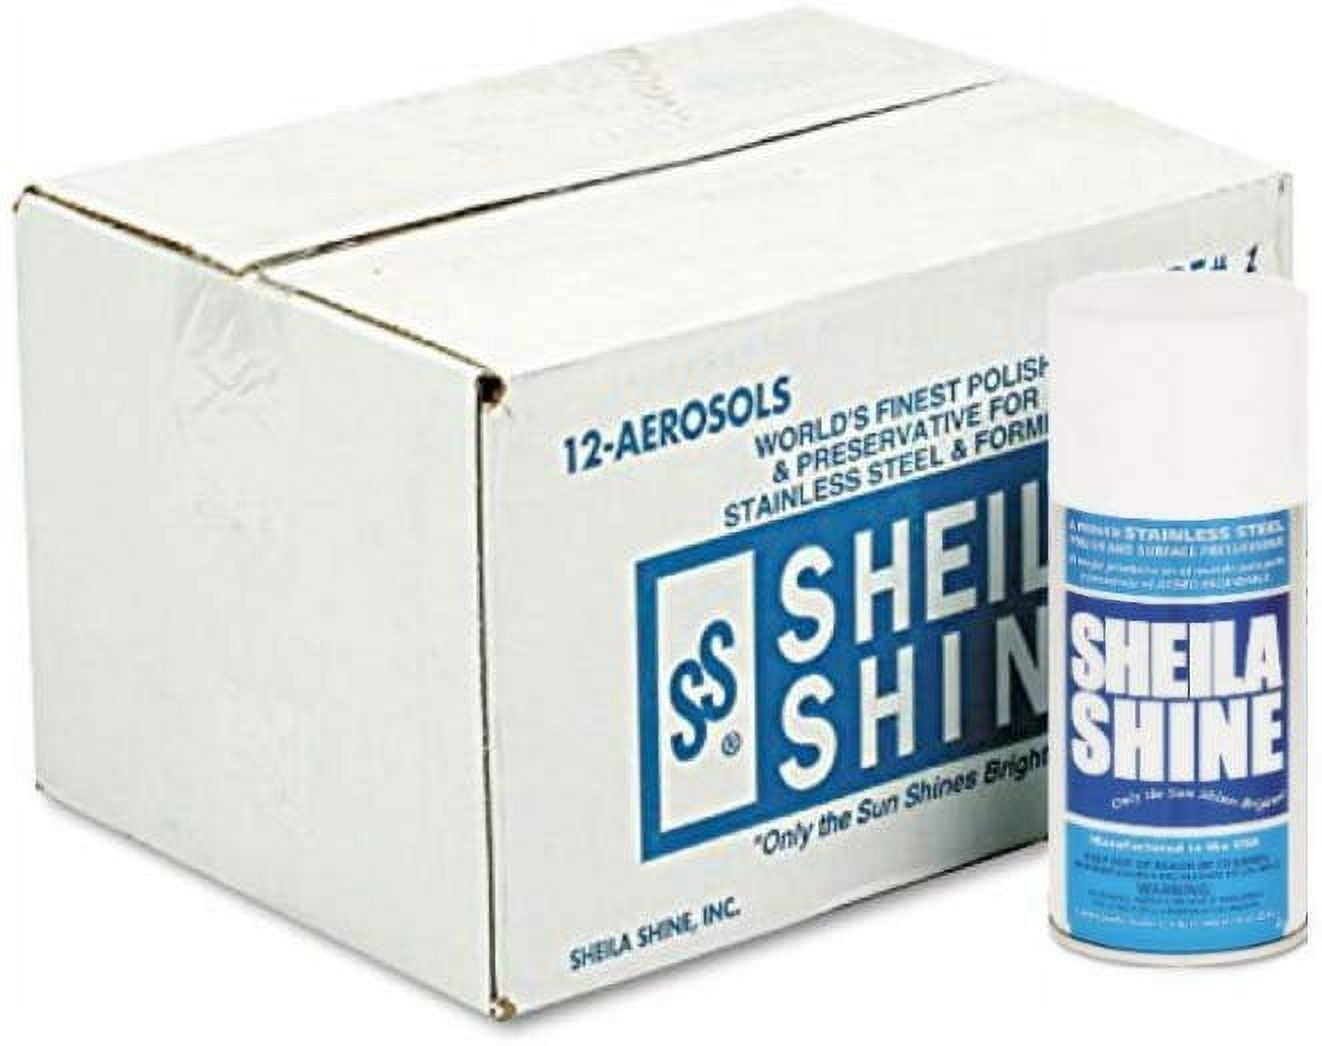 Sheila Shine Stainless Steel Cleaner